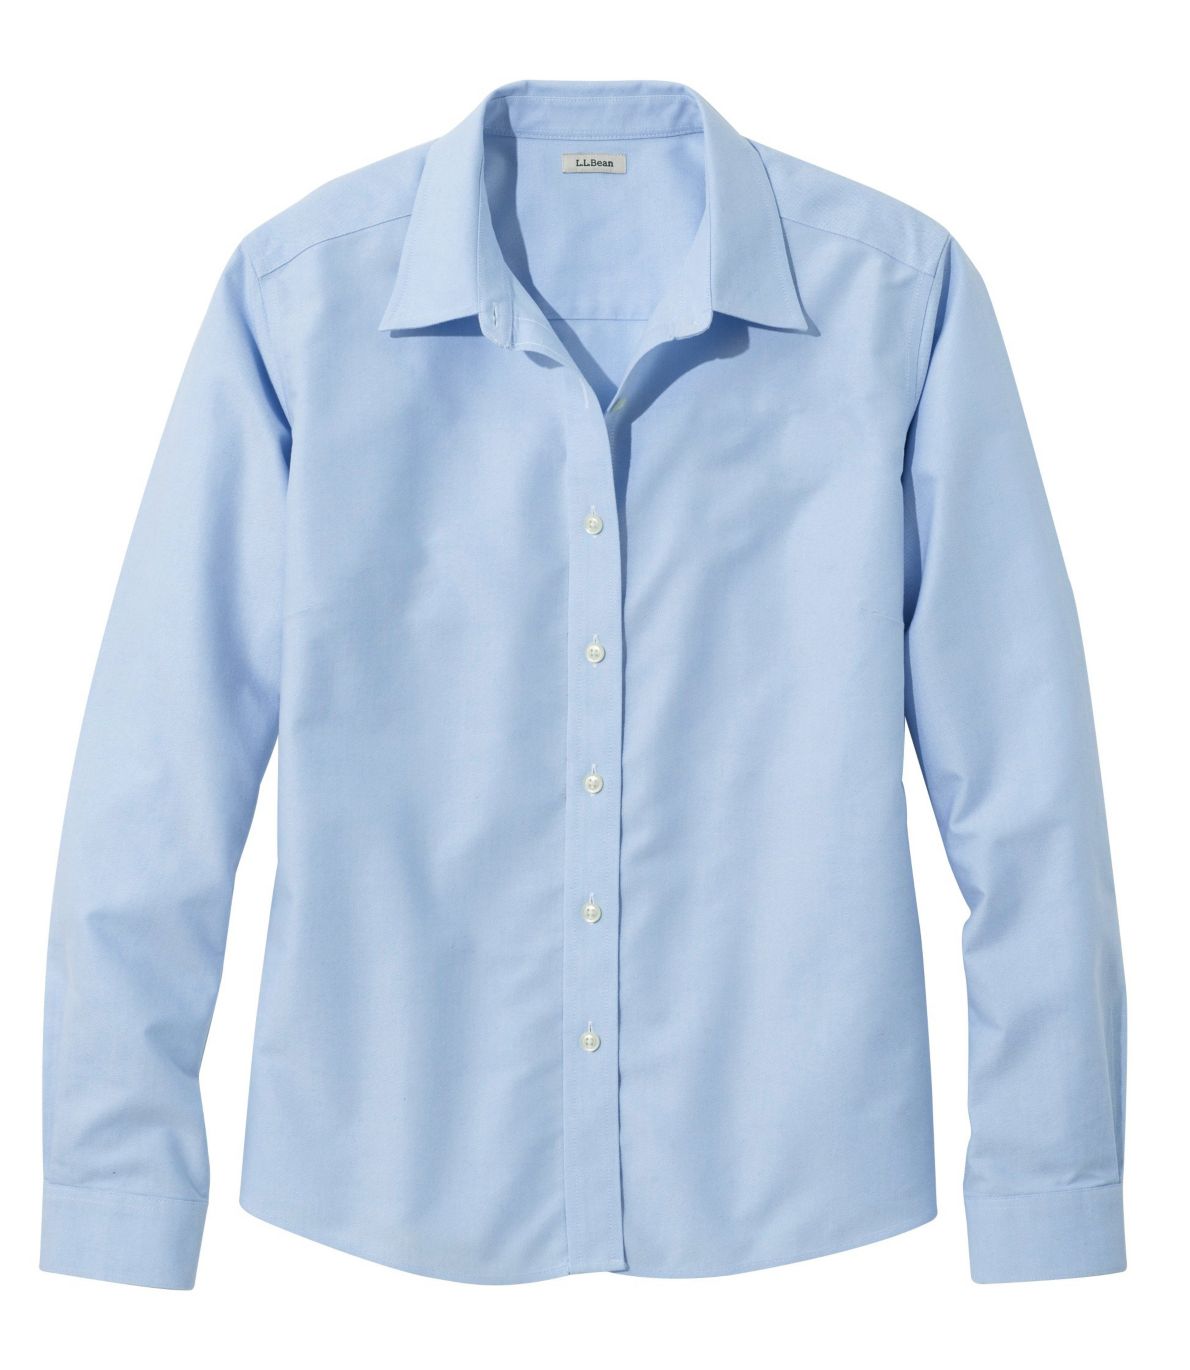 Long-Sleeve Wrinkle Resistant All Cotton Shirt Fit